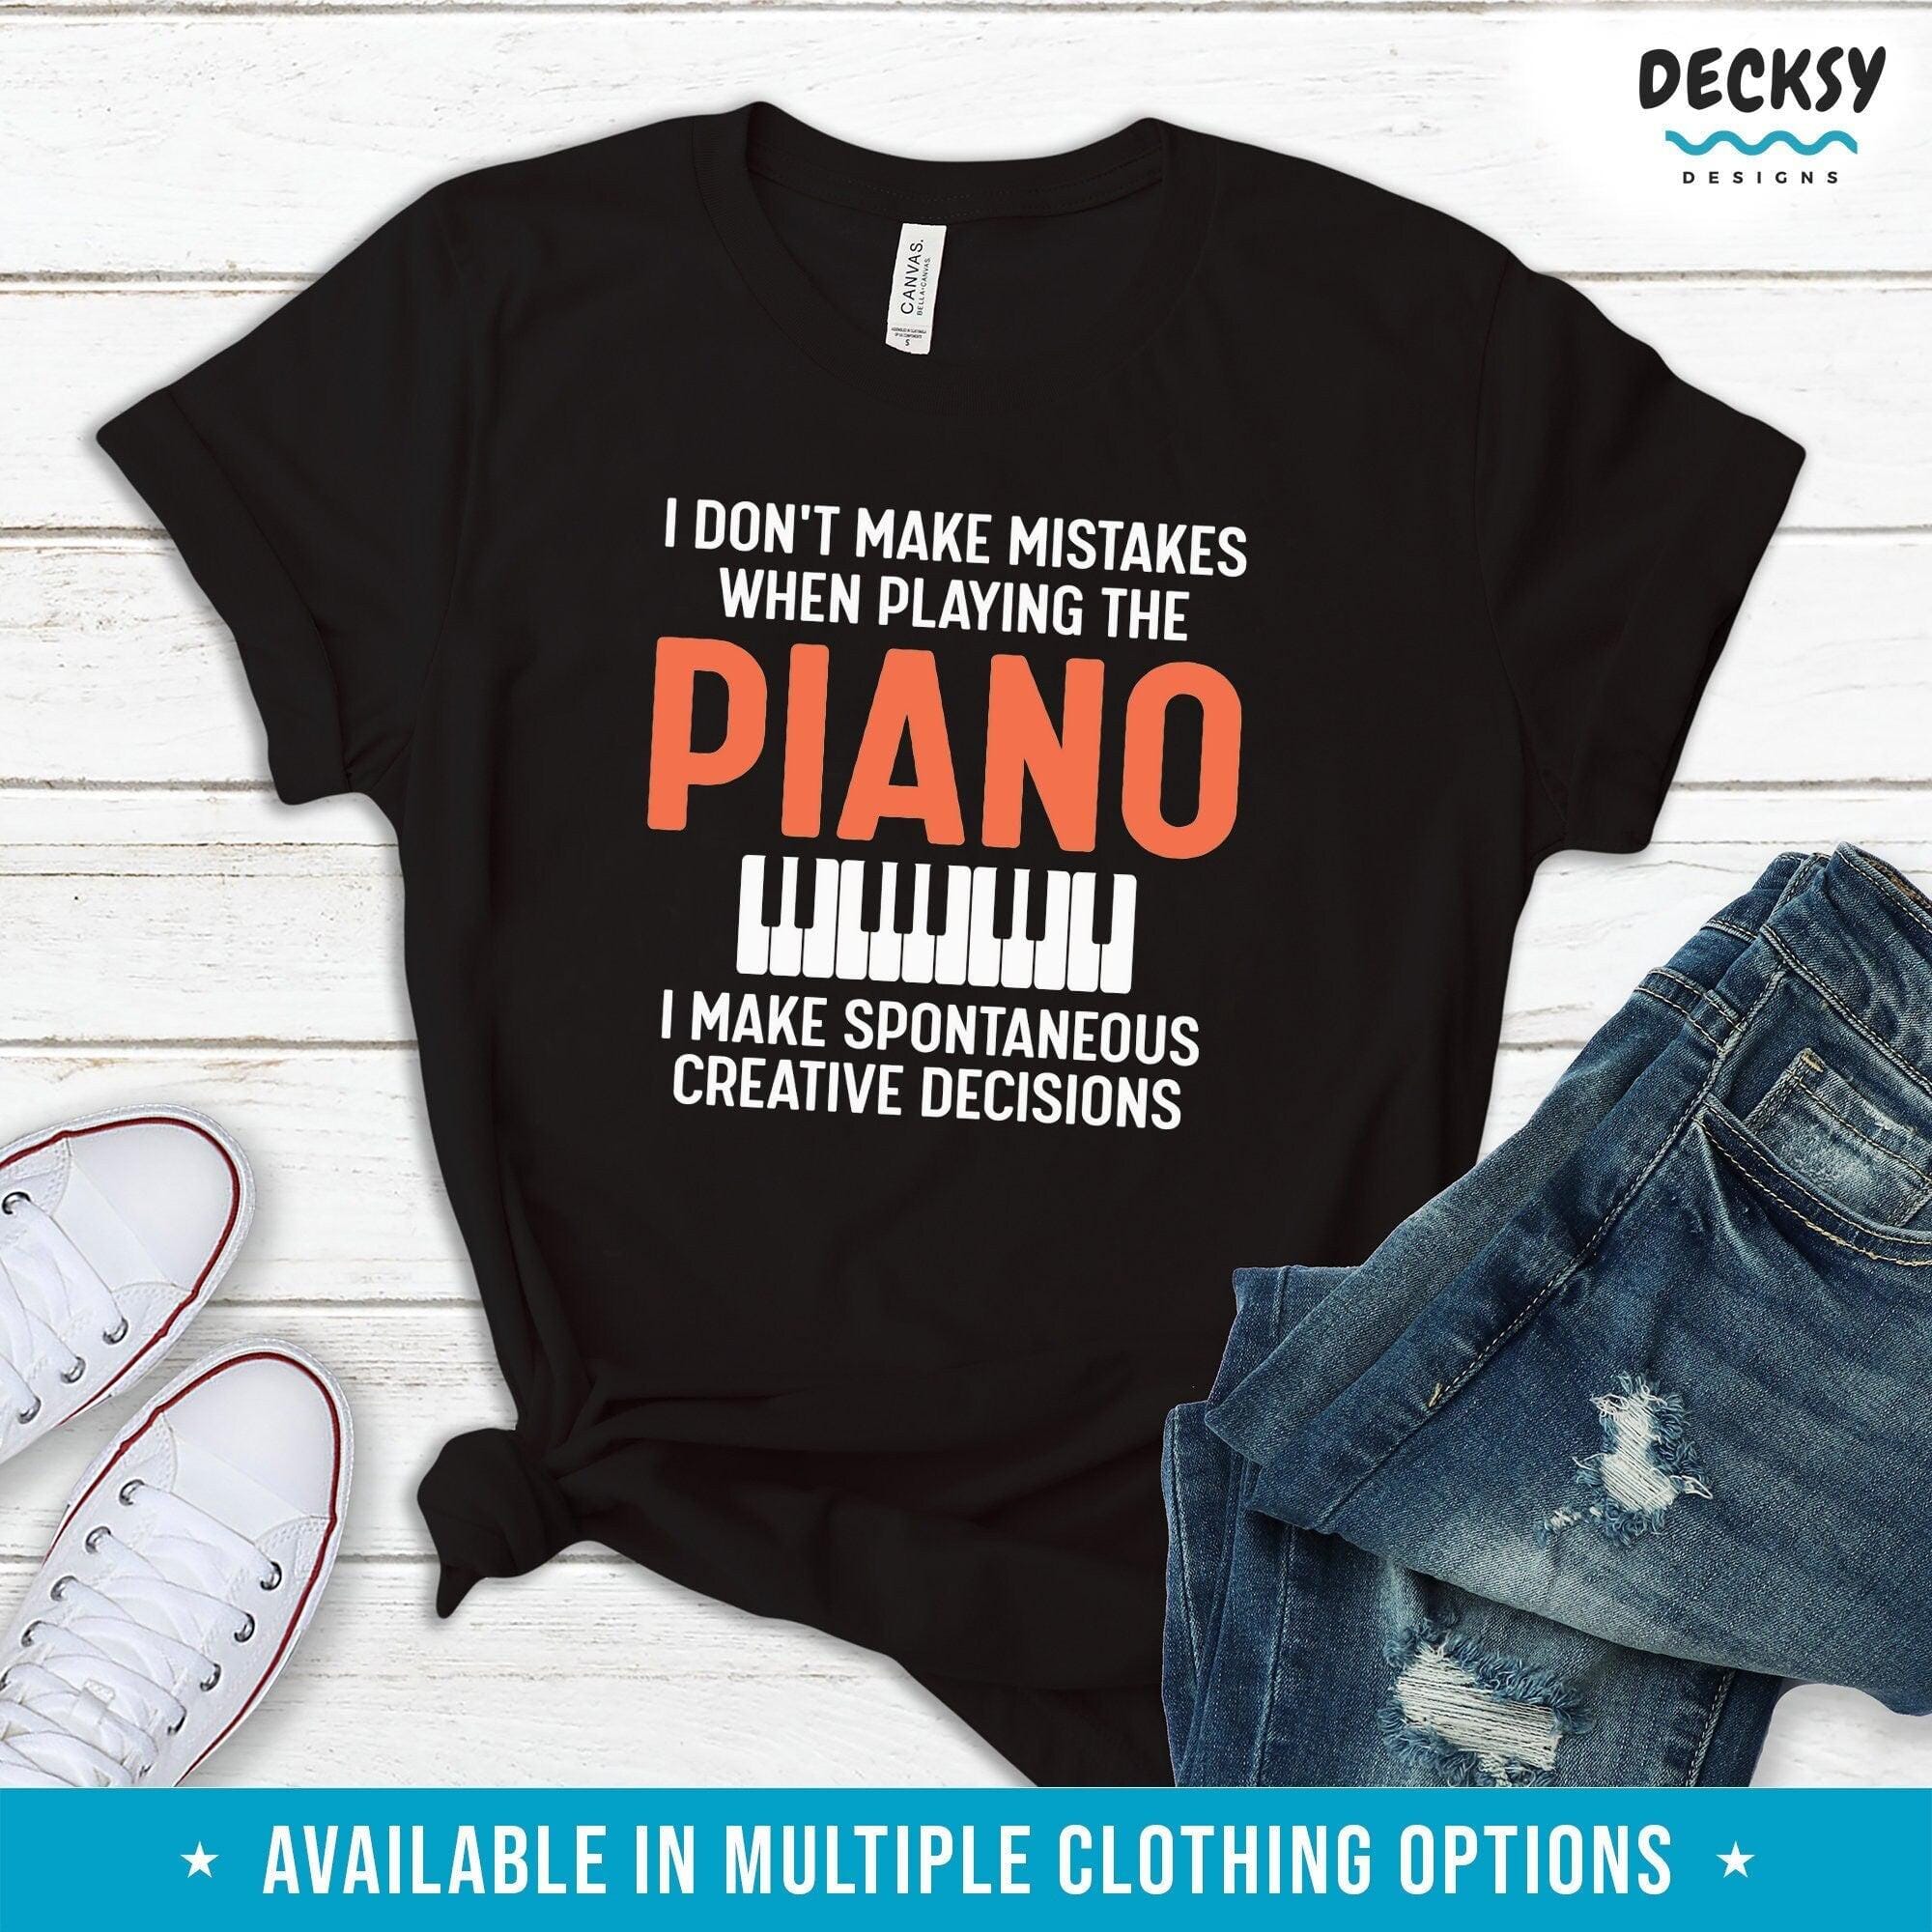 Pianist Shirt, Piano Teacher Gift-Clothing:Gender-Neutral Adult Clothing:Tops & Tees:T-shirts:Graphic Tees-DecksyDesigns